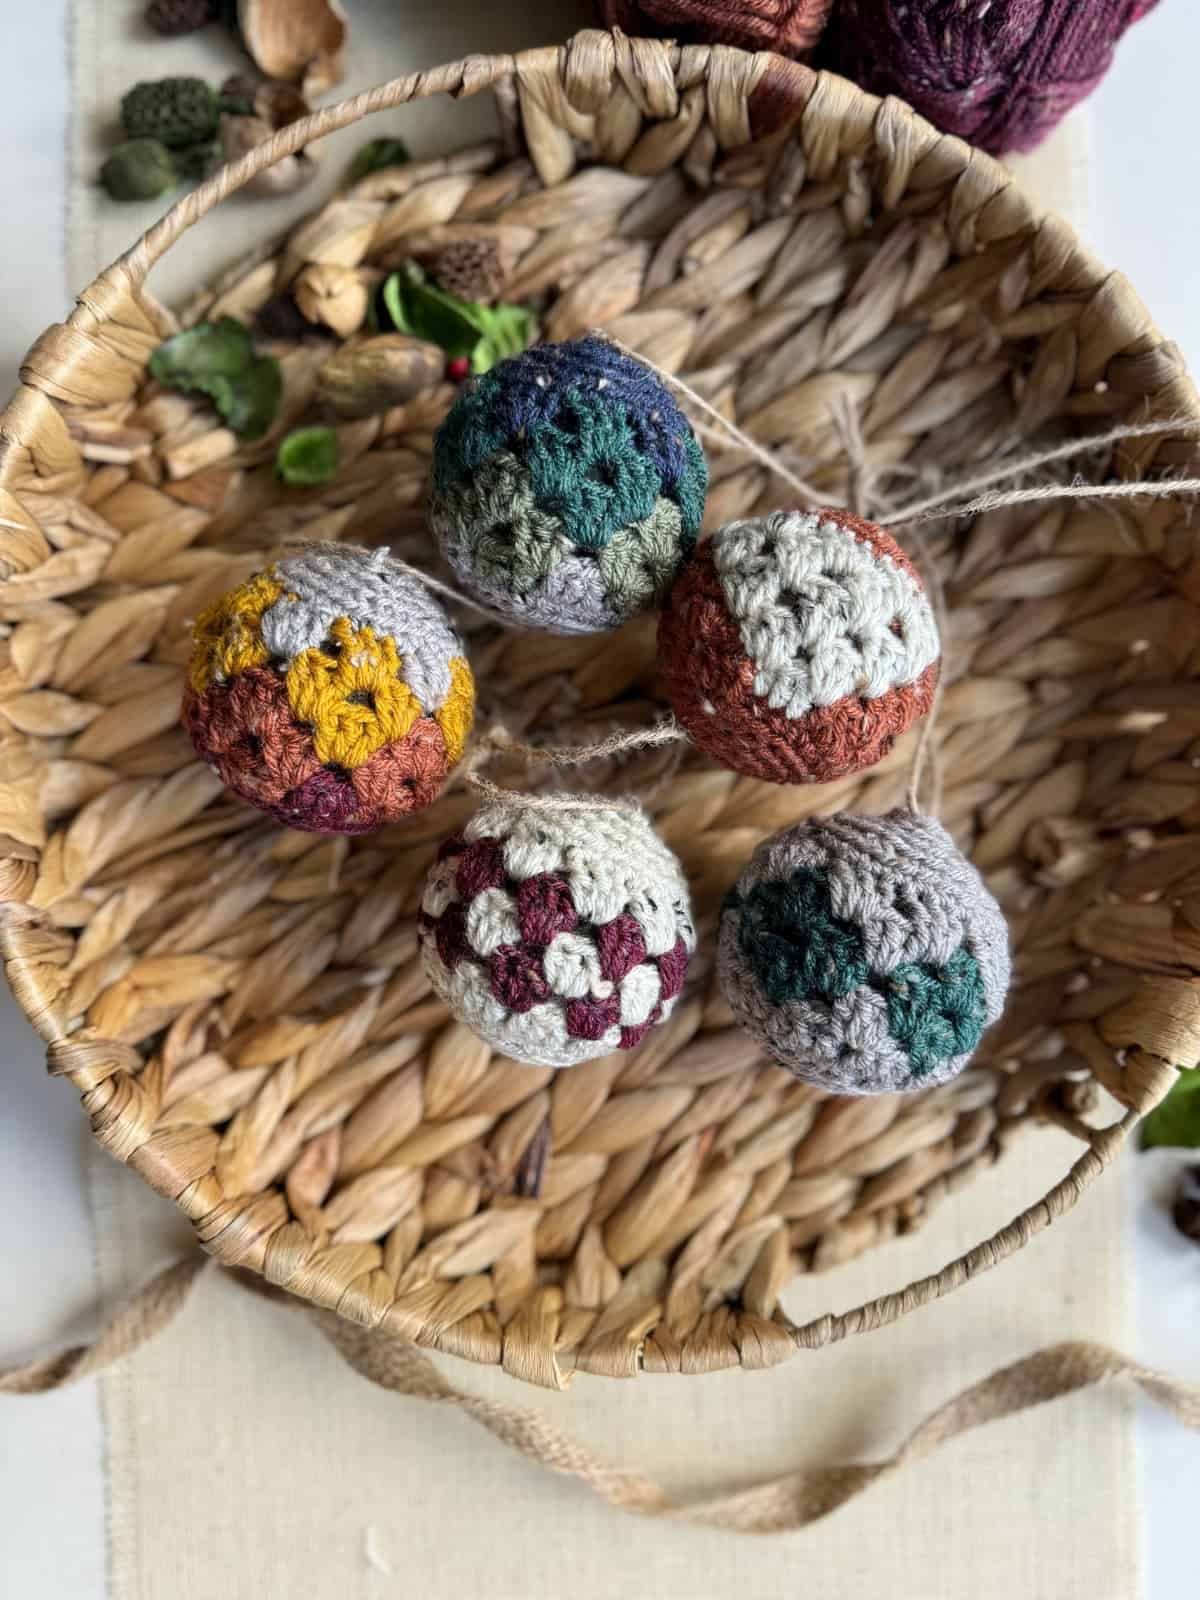 Crocheted ornaments in a basket on a table.